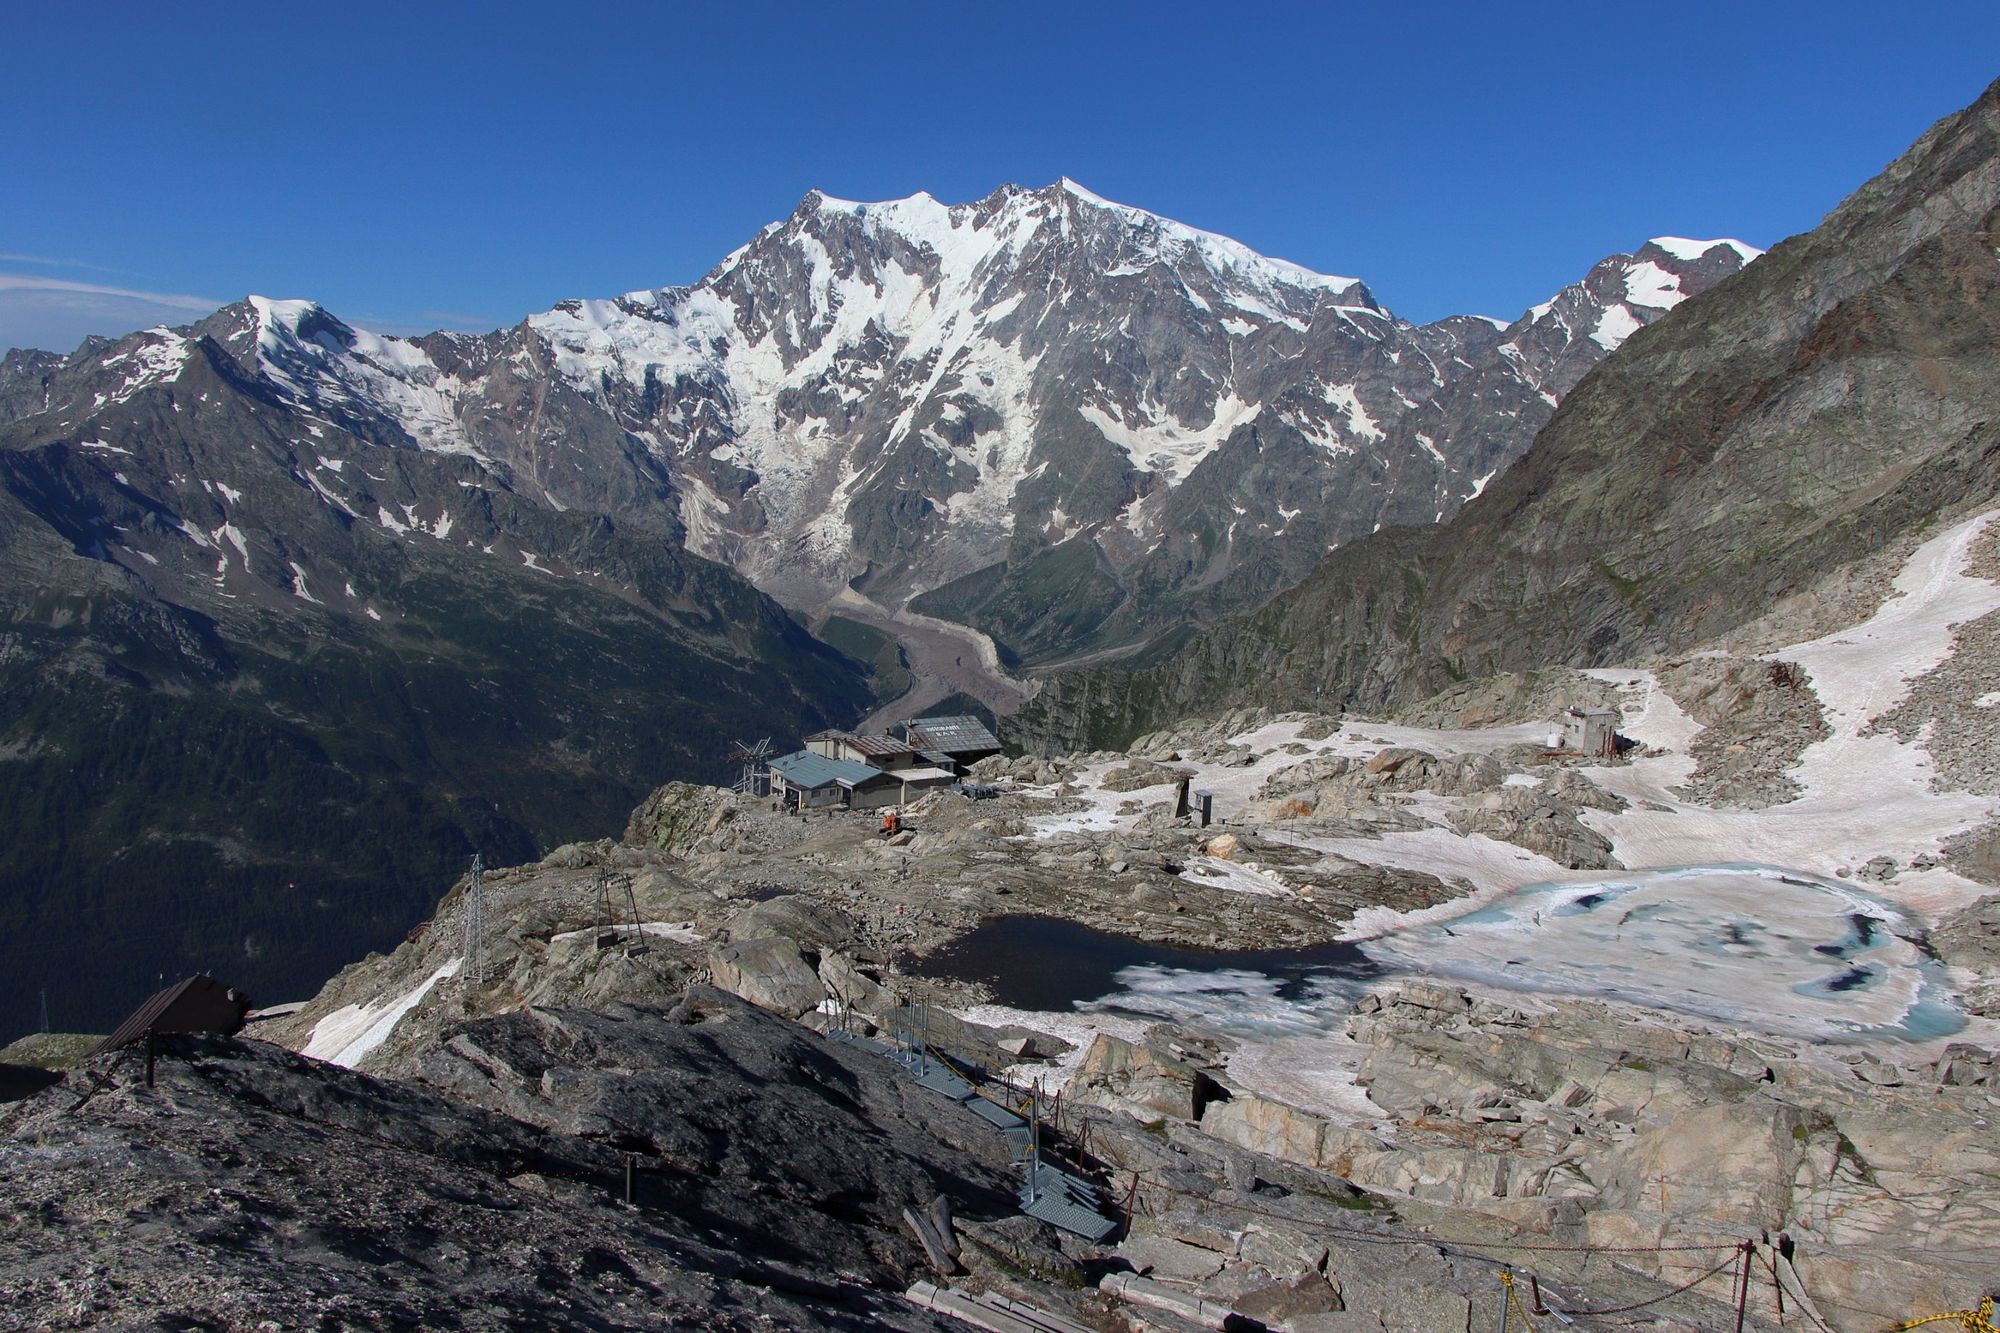 Views of the Lys Glacier from Monte Moro. Photo: Getty